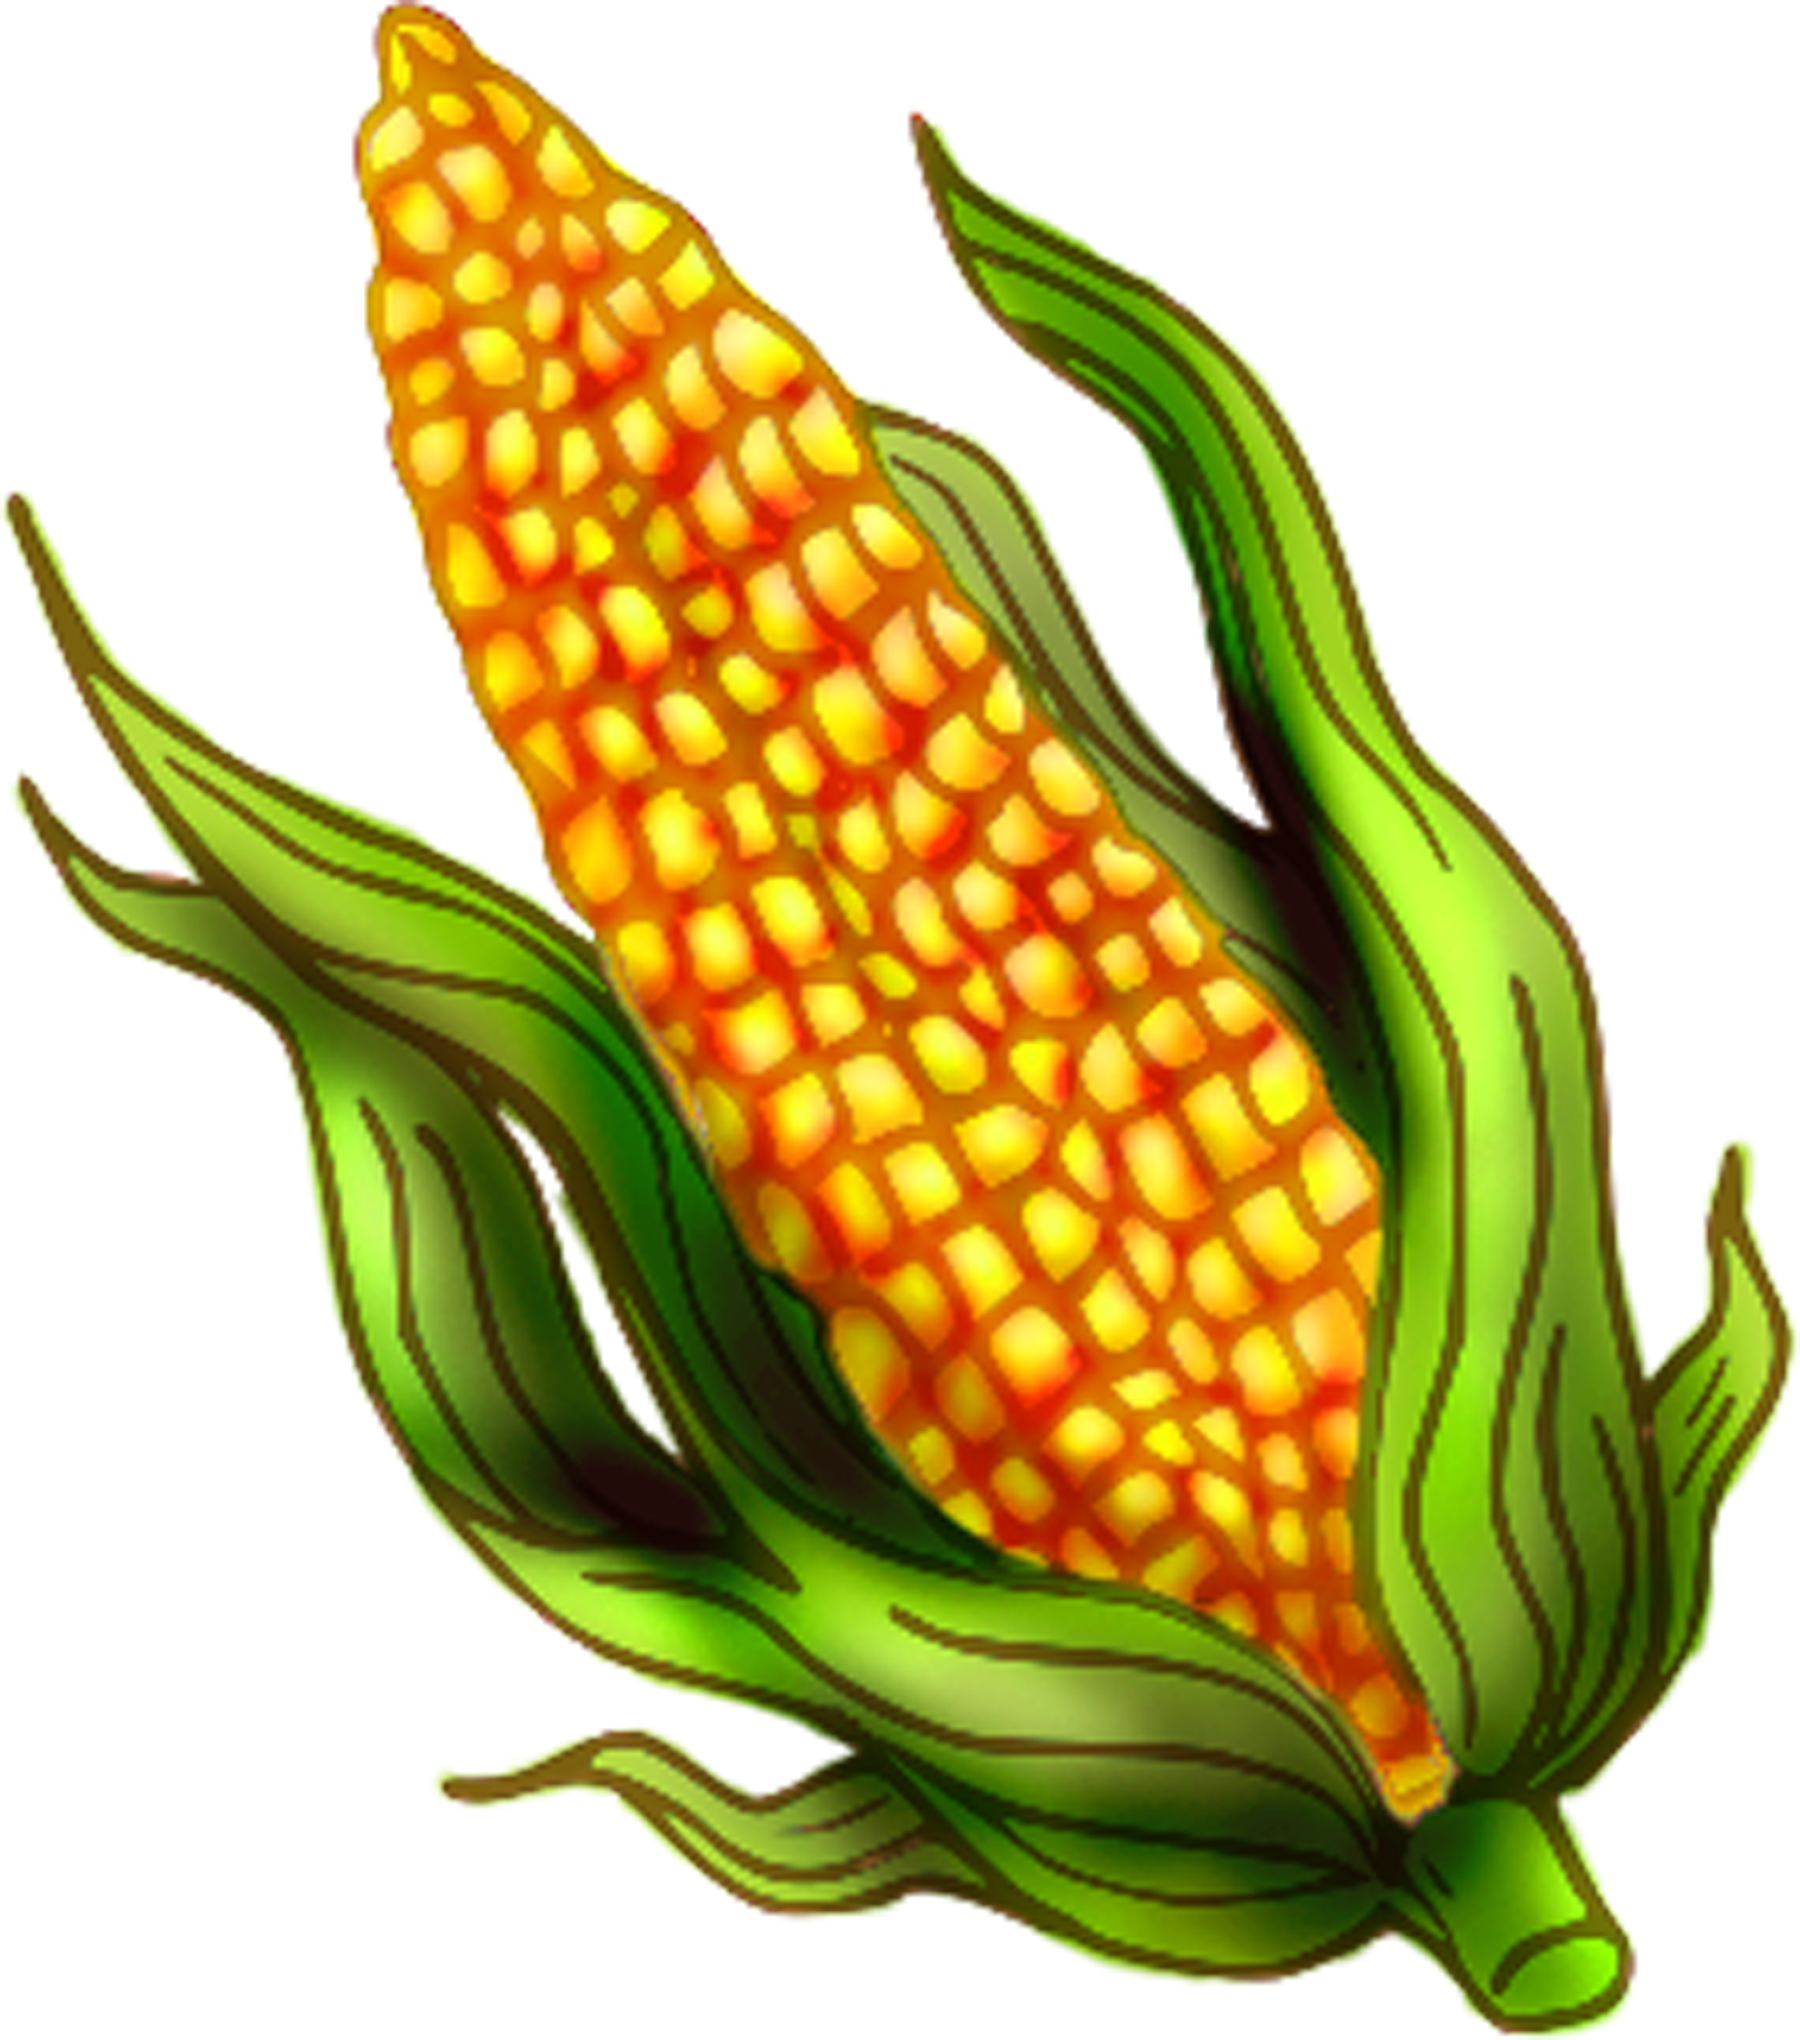 Baked picture gallery image. Beans clipart corn